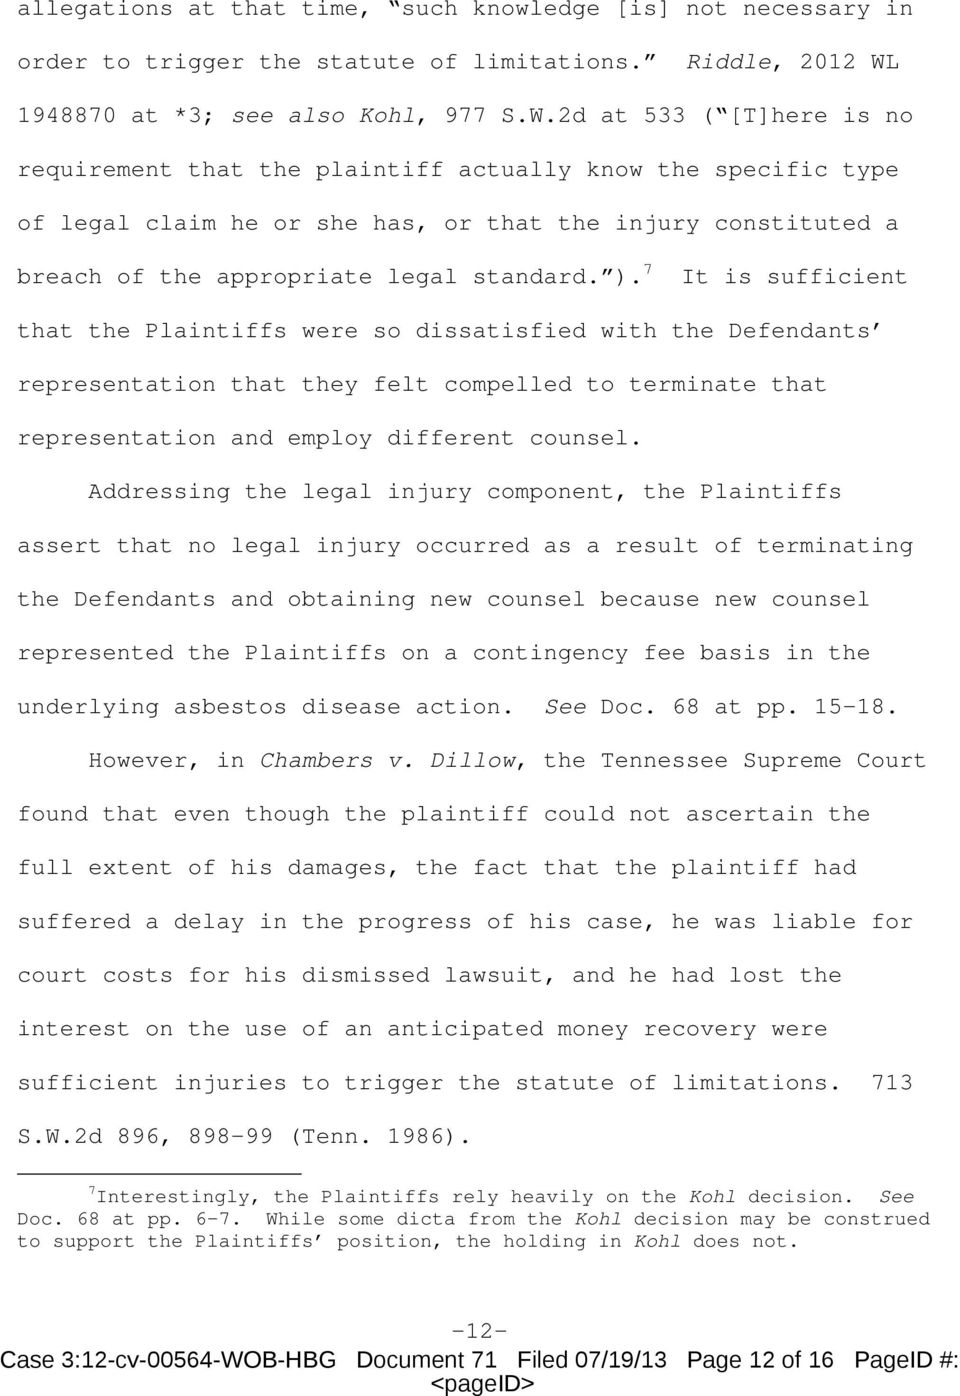 2d at 533 ( [T]here is no requirement that the plaintiff actually know the specific type of legal claim he or she has, or that the injury constituted a breach of the appropriate legal standard. ).